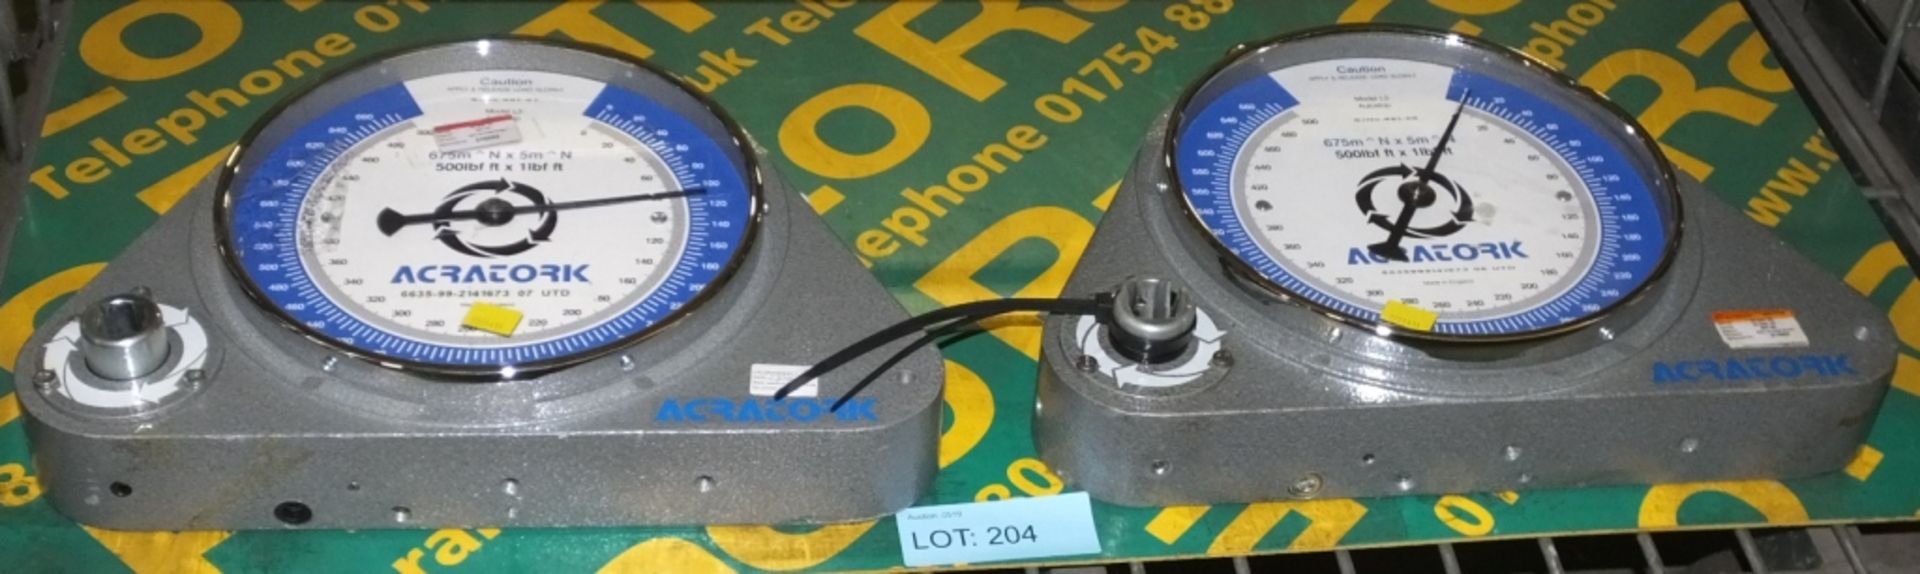 2x Acratork L3 - Torque wrench testers - 1 as spares